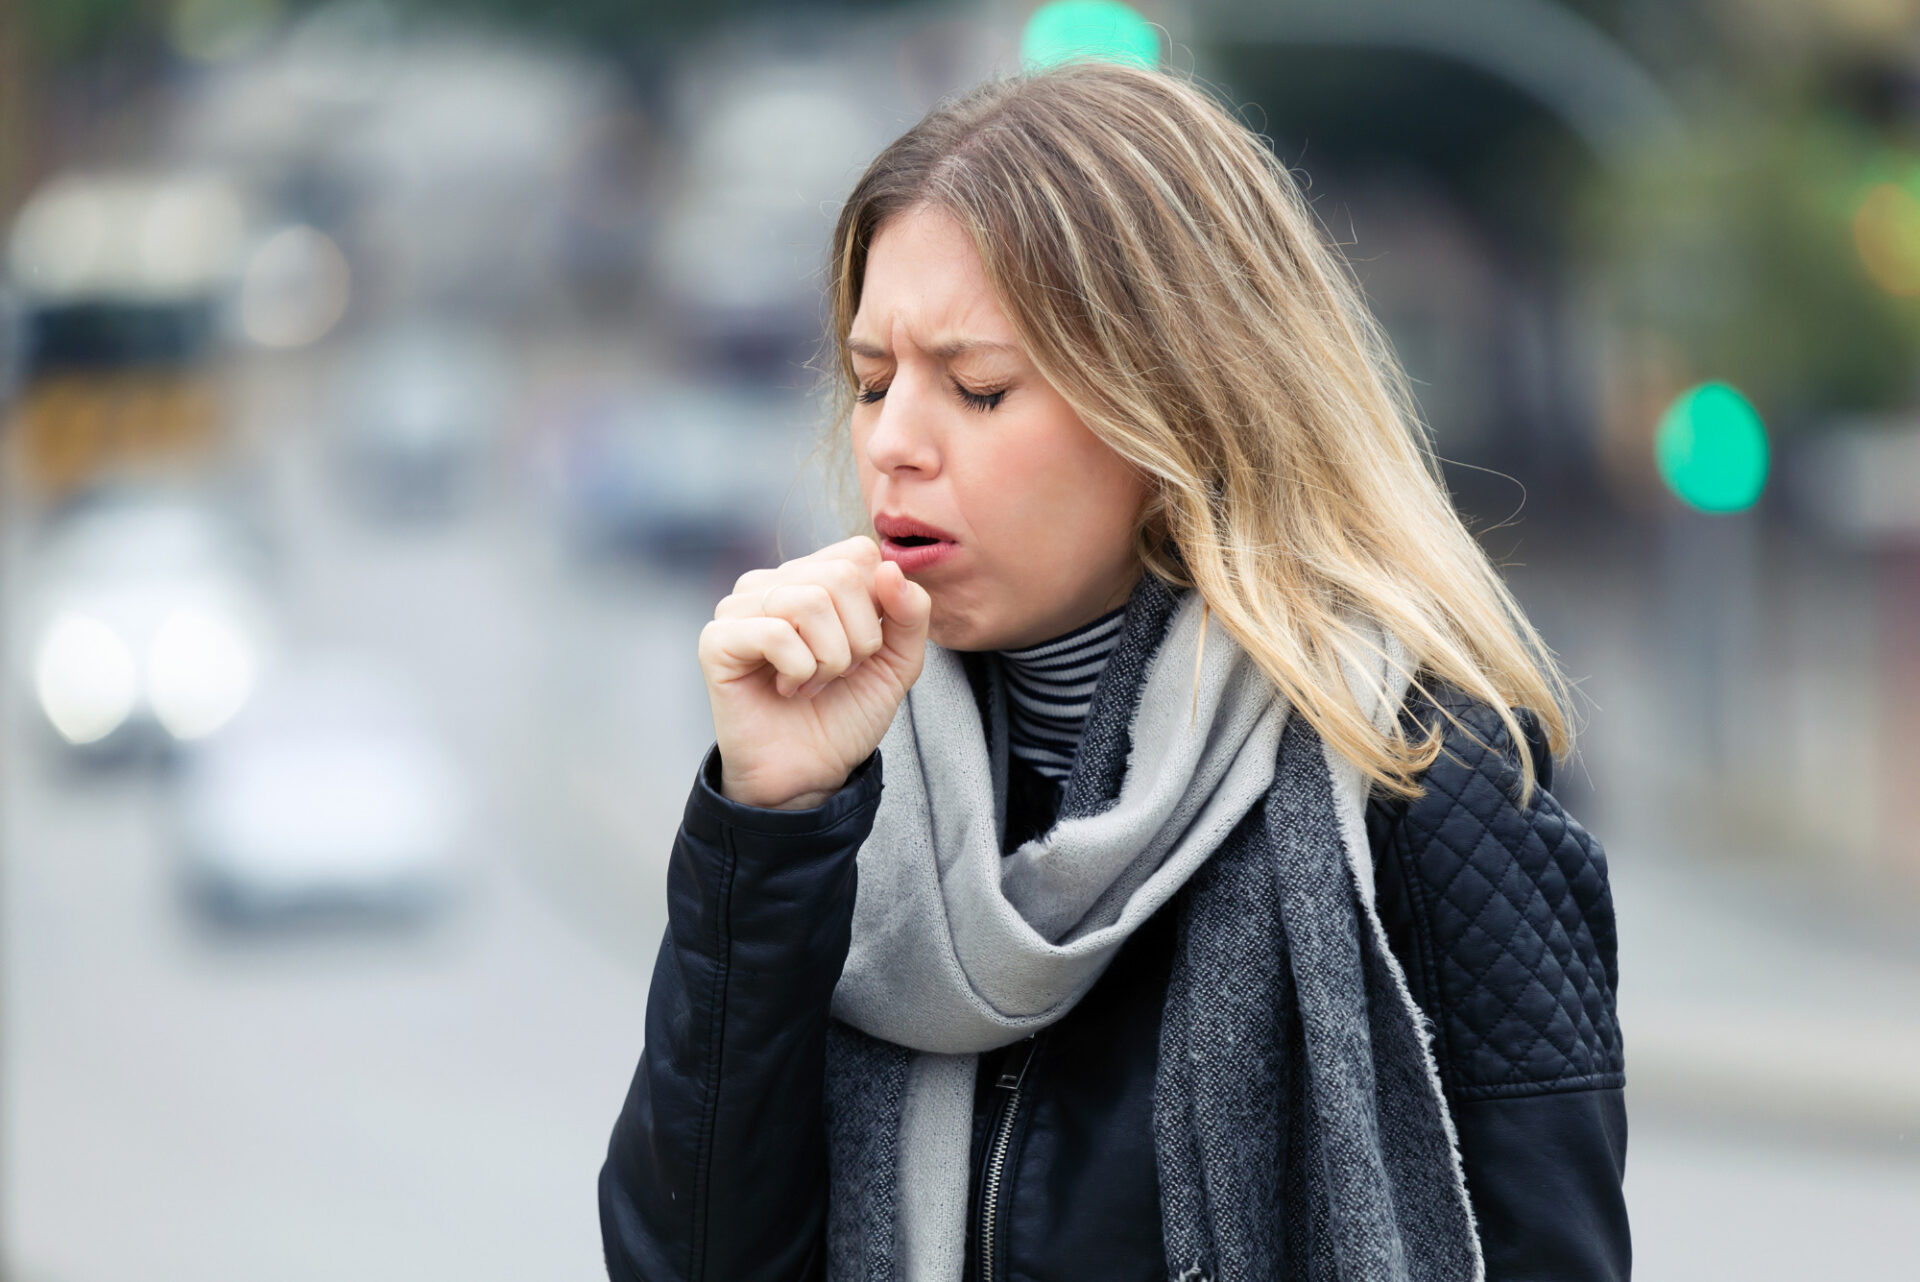 Post-Infectious Cough: The Cough That Won’t Go Away